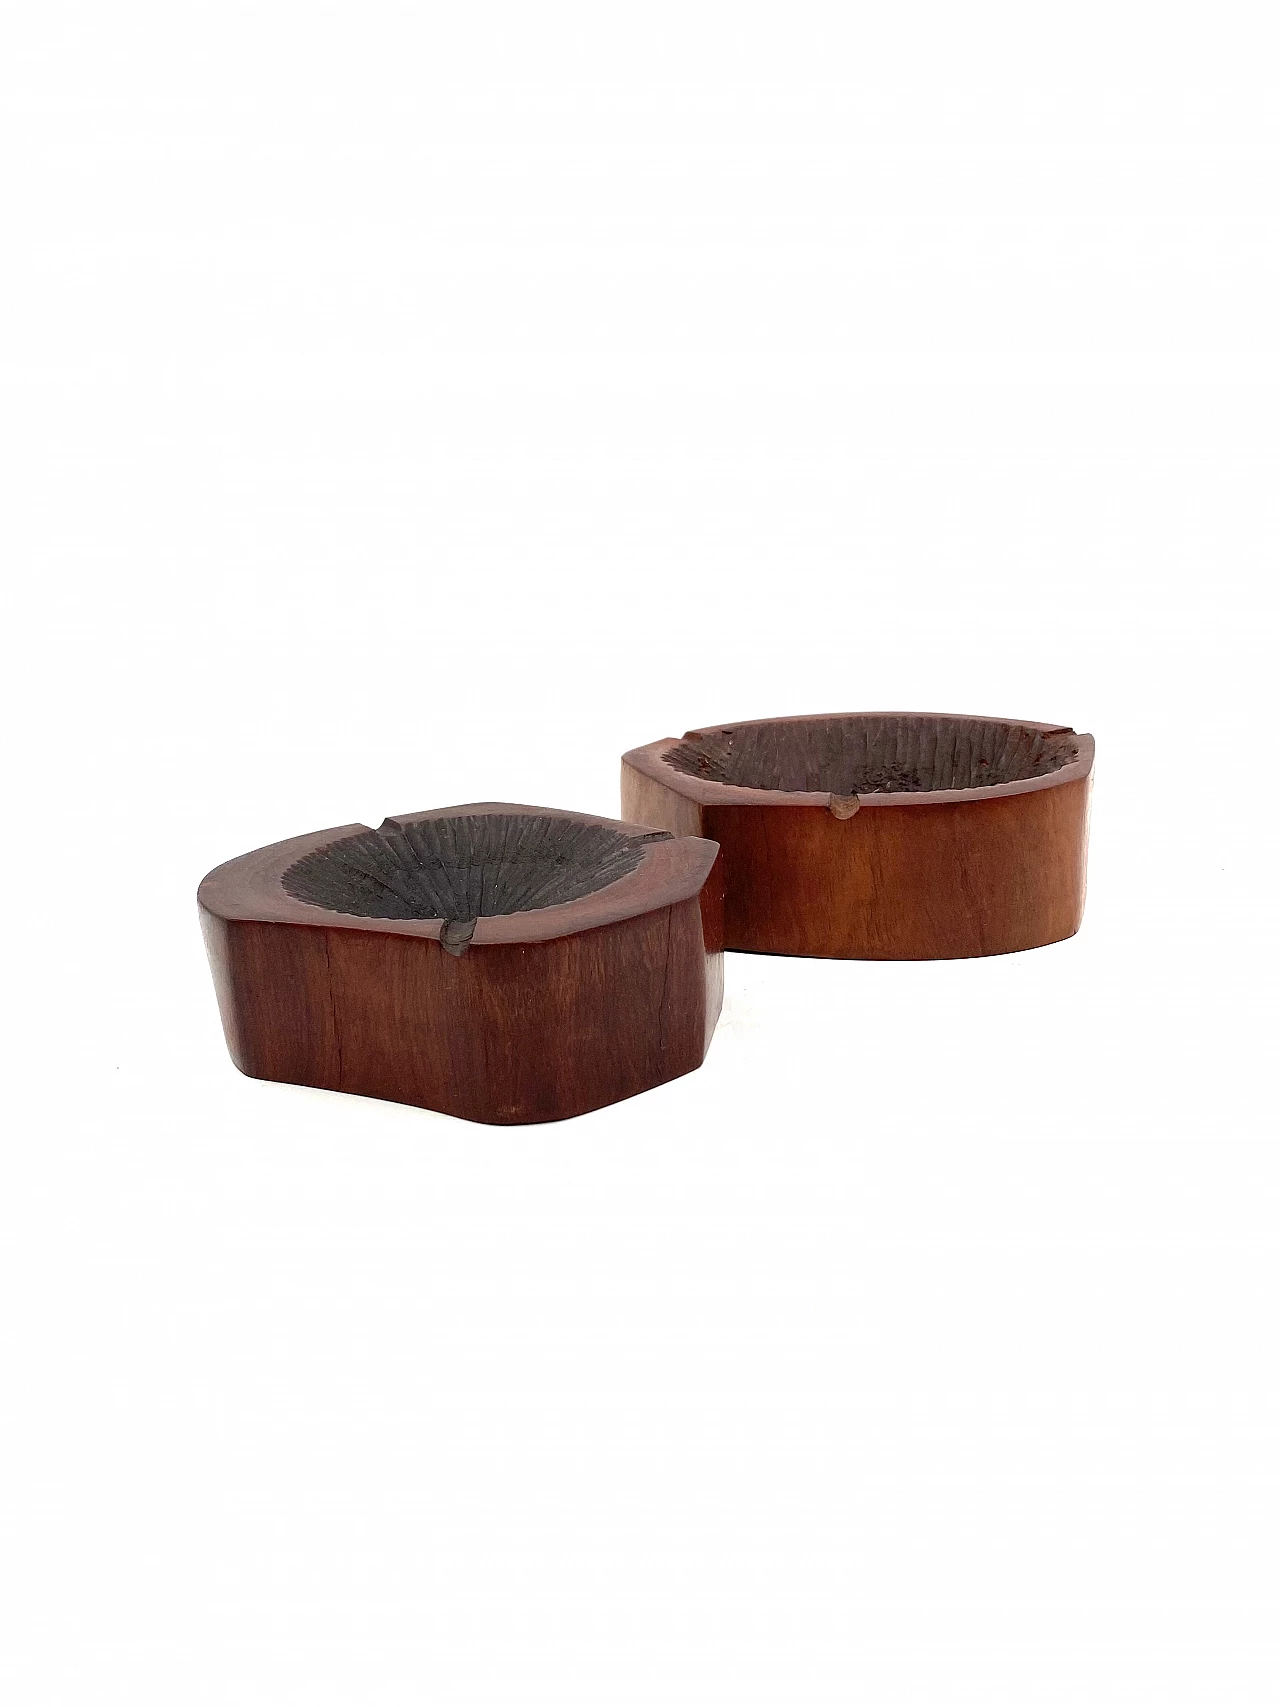 Pair of wooden ashtrays in Monique Gerber's style, 1970s 9